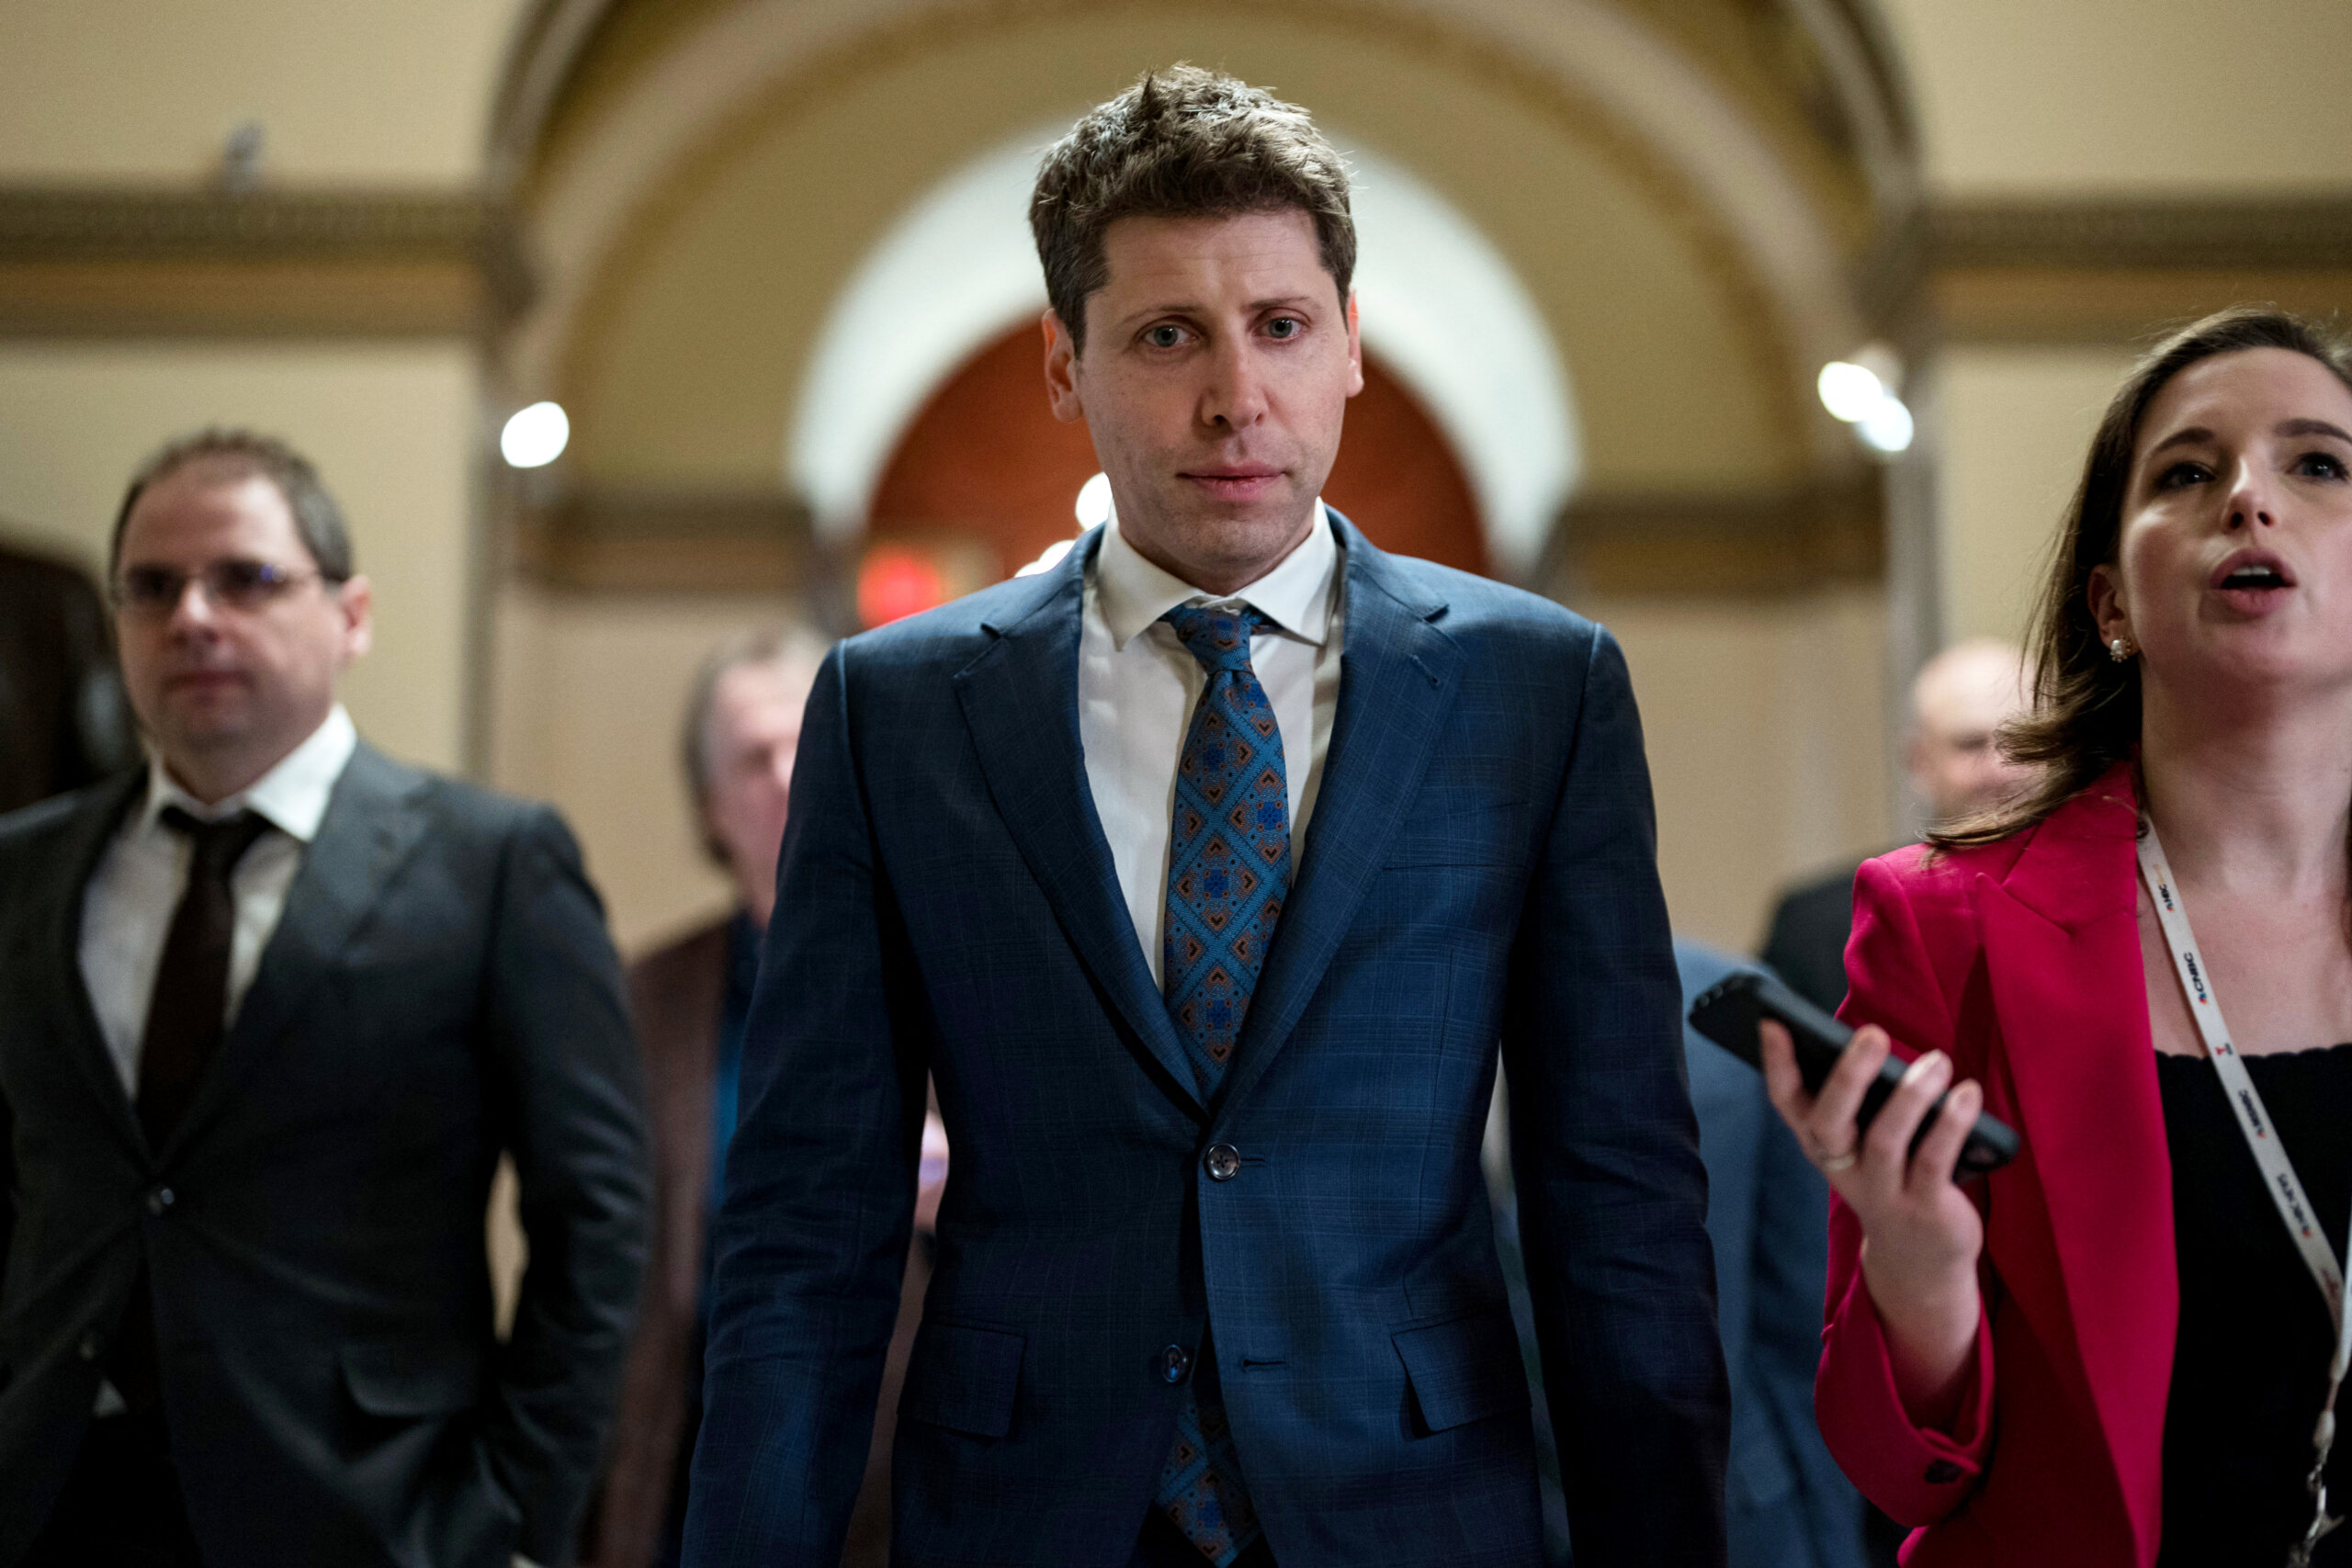 The CEO of OpenAI, Sam Altman, has been wooing investors, like G42 and SoftBank, for chip fabs capital. (Photo by Kent Nishimura/GETTY IMAGES NORTH AMERICA/Getty Images via AFP).